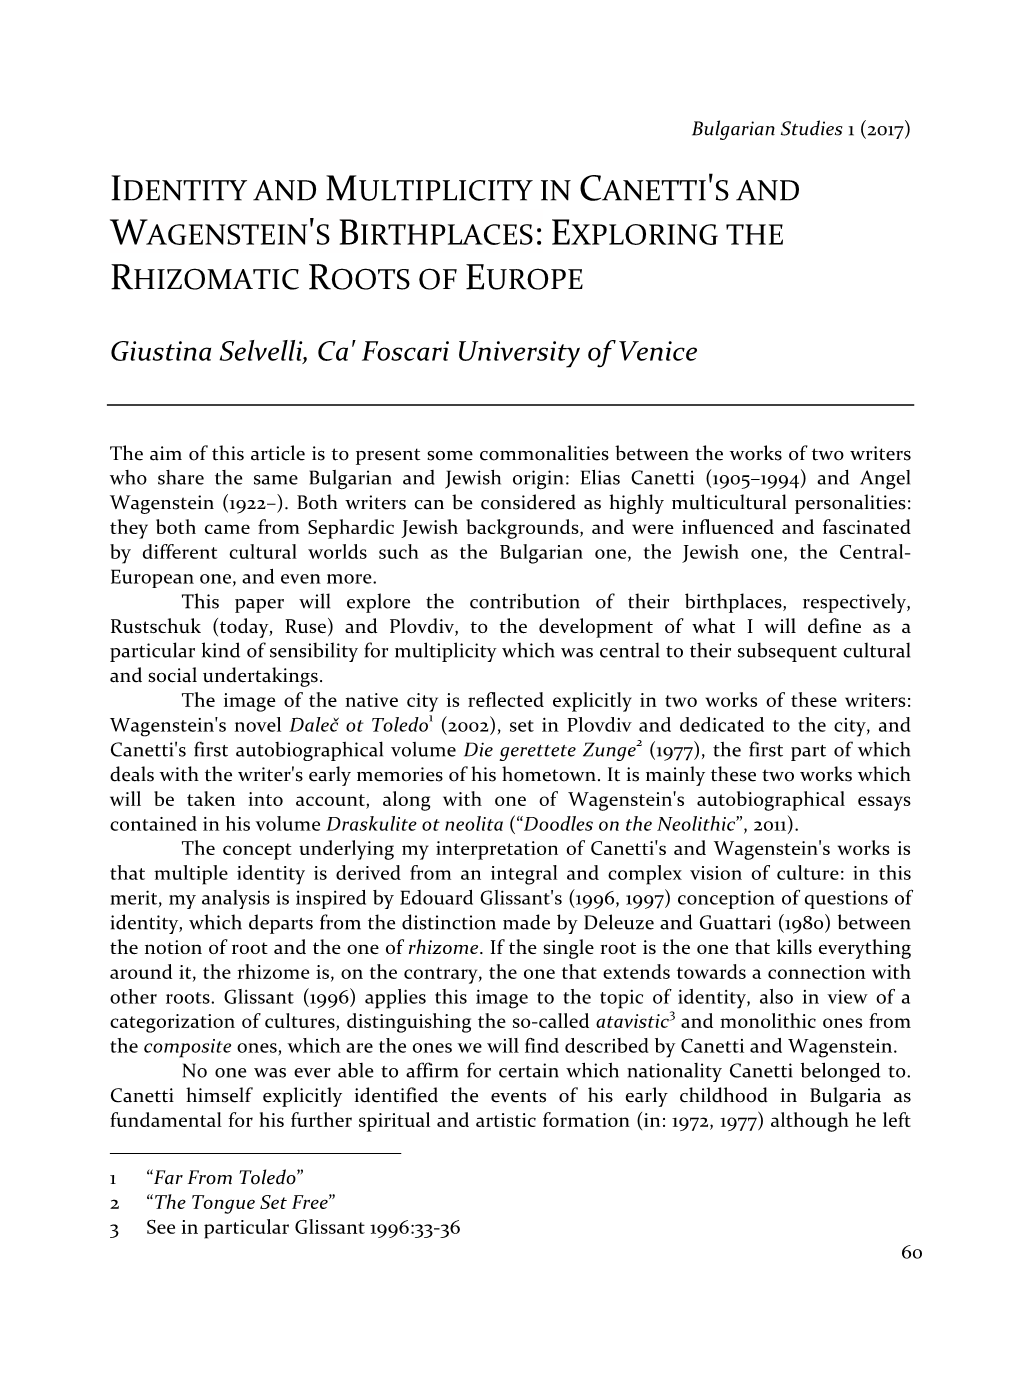 Identity and Multiplicity in Canetti's and Wagenstein's Birthplaces: Exploring the Rhizomatic Roots of Europe